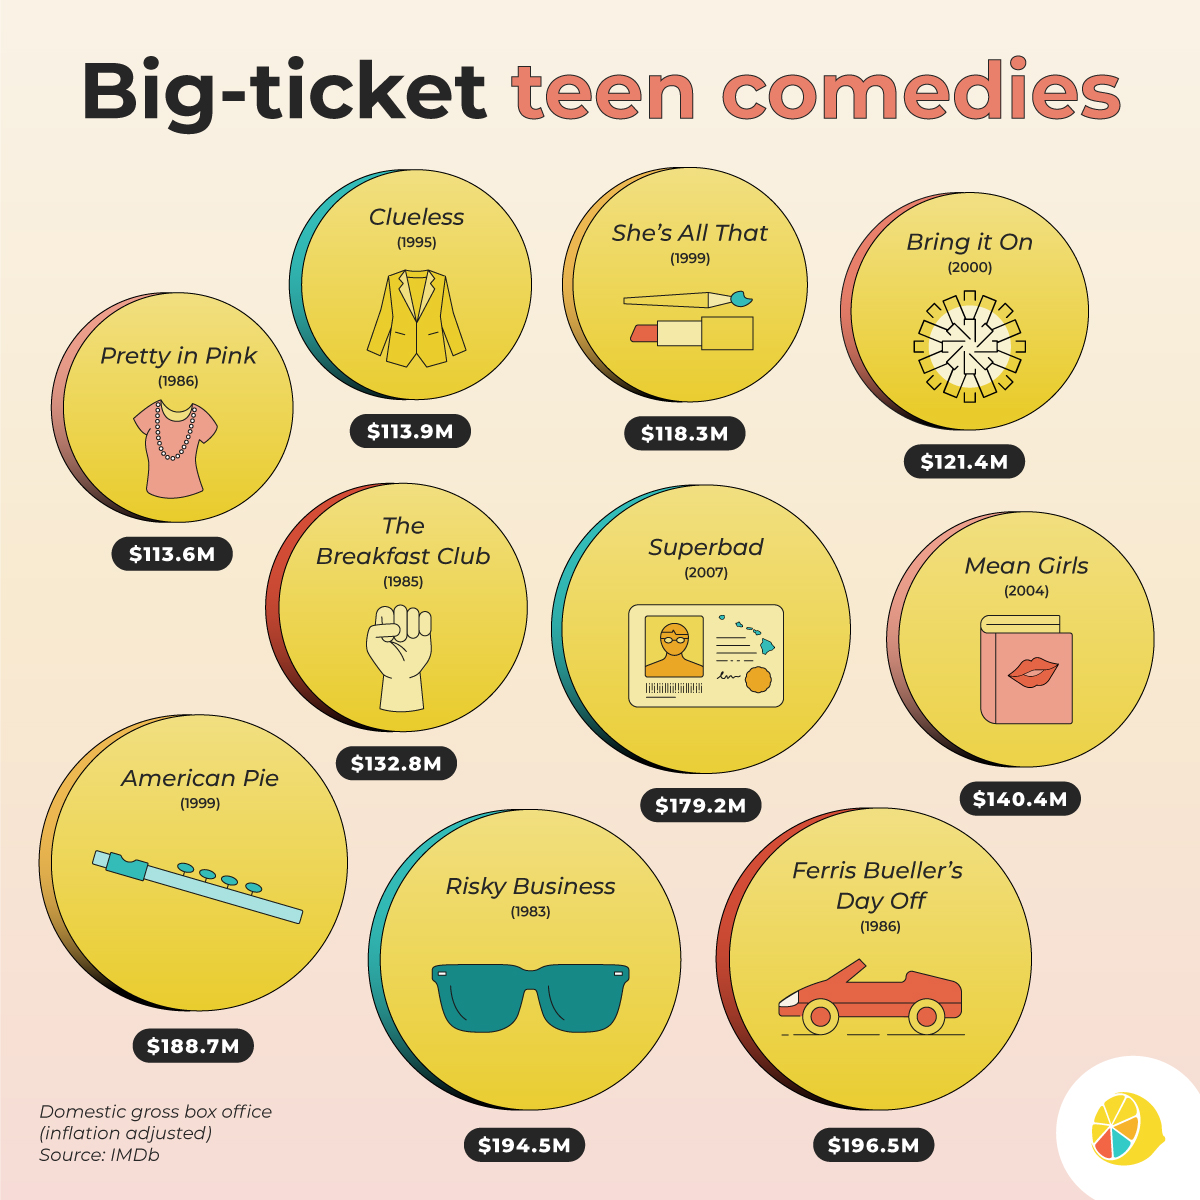 Top Teen Comedies at the Box Office